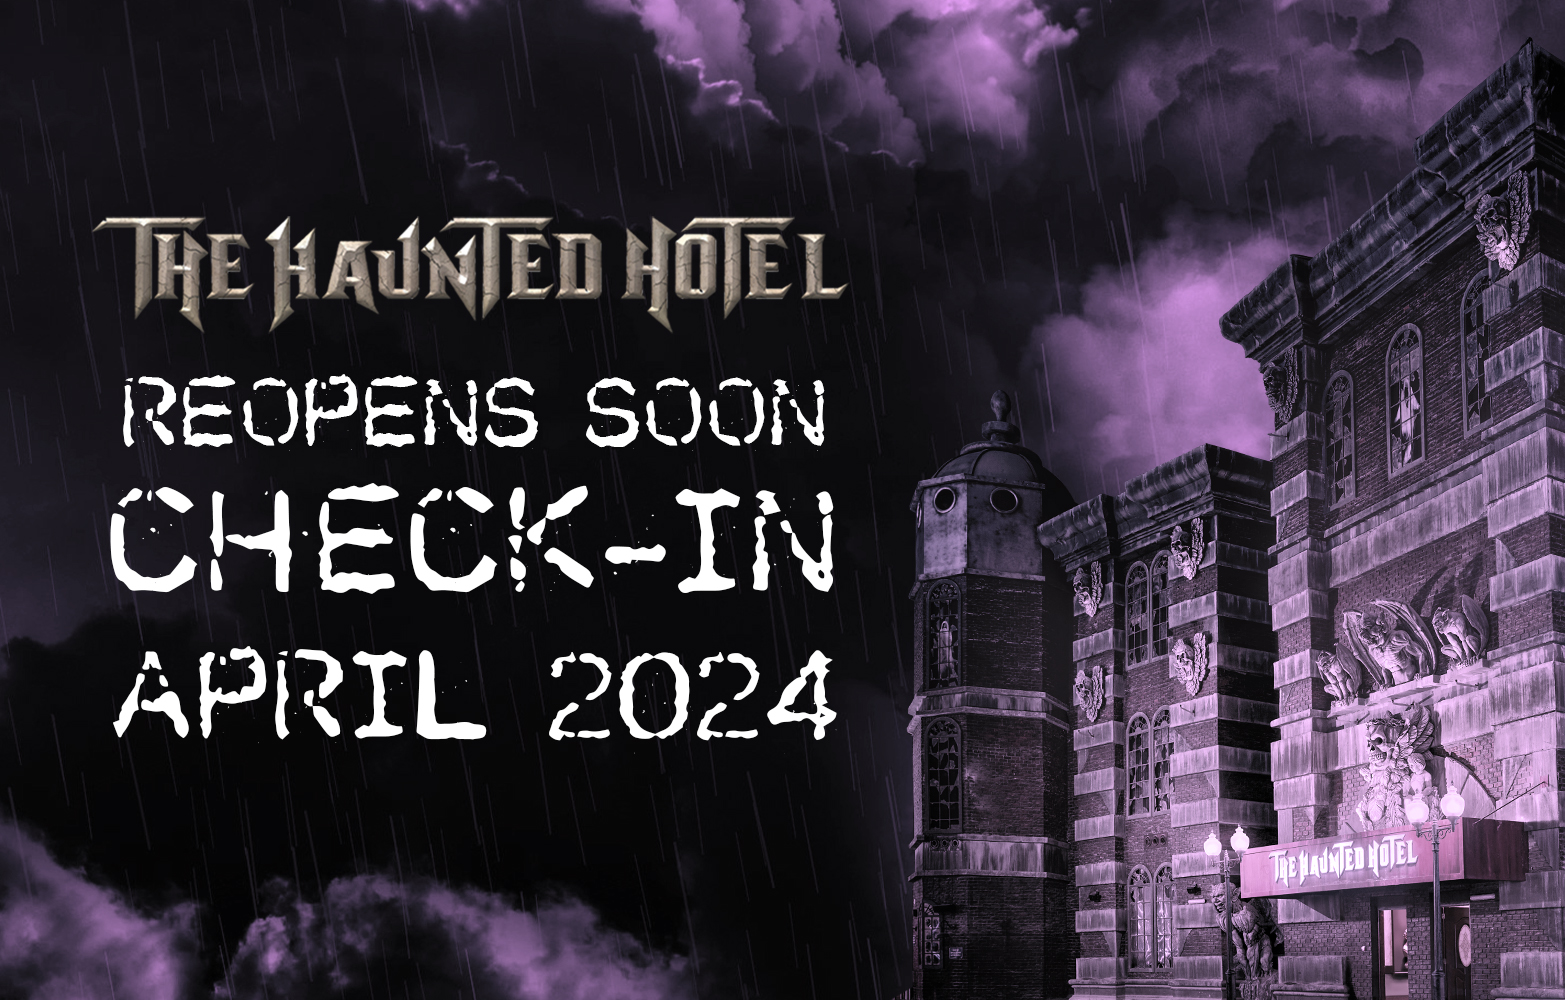 The Haunted Hotel - Reopens Soon